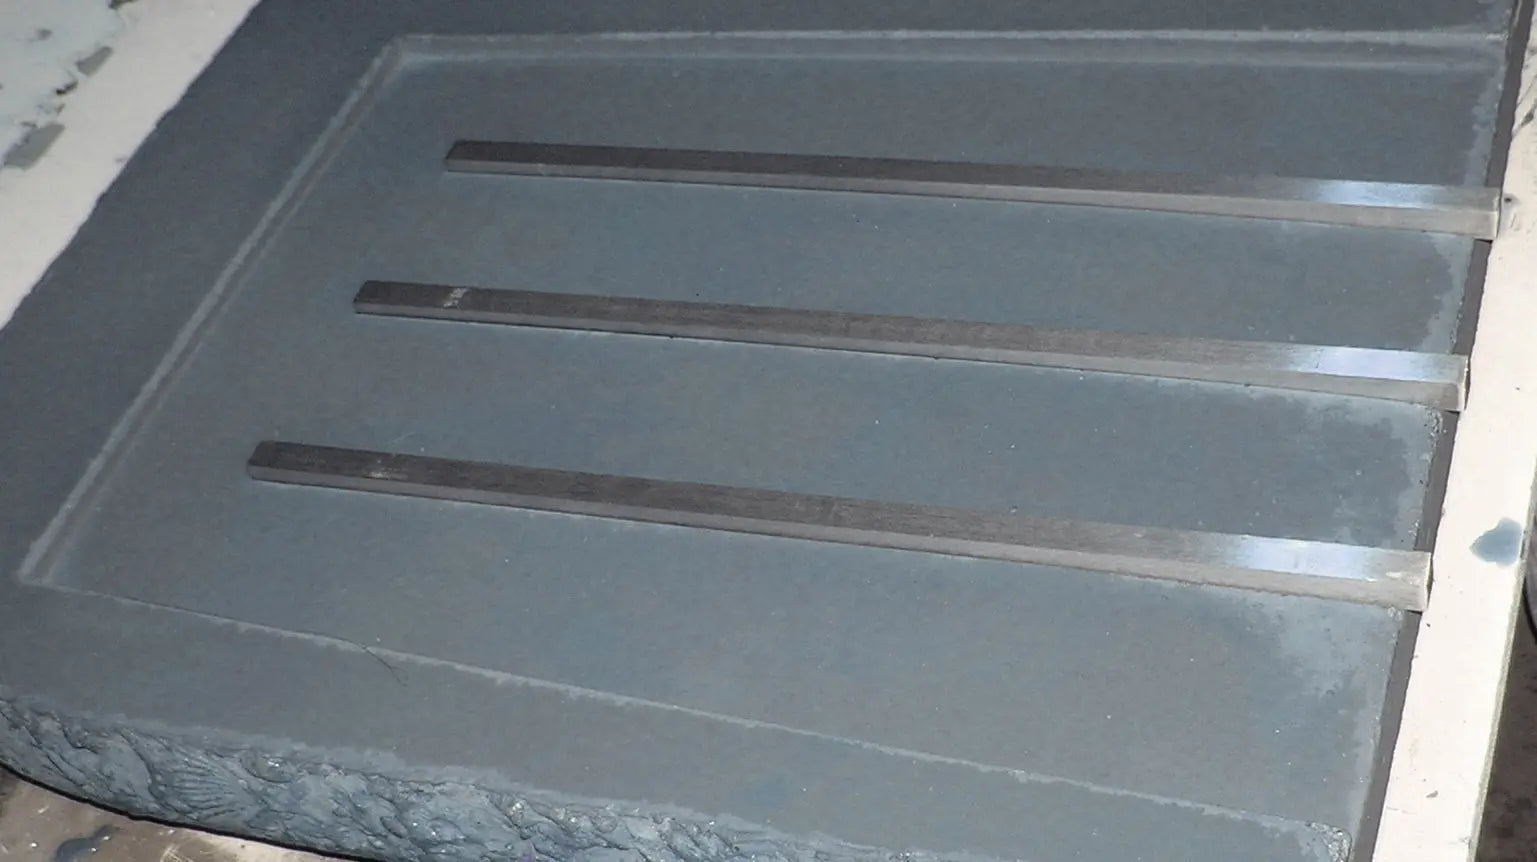 Concrete Drainboard Insert Mold - Grill PNL Liners